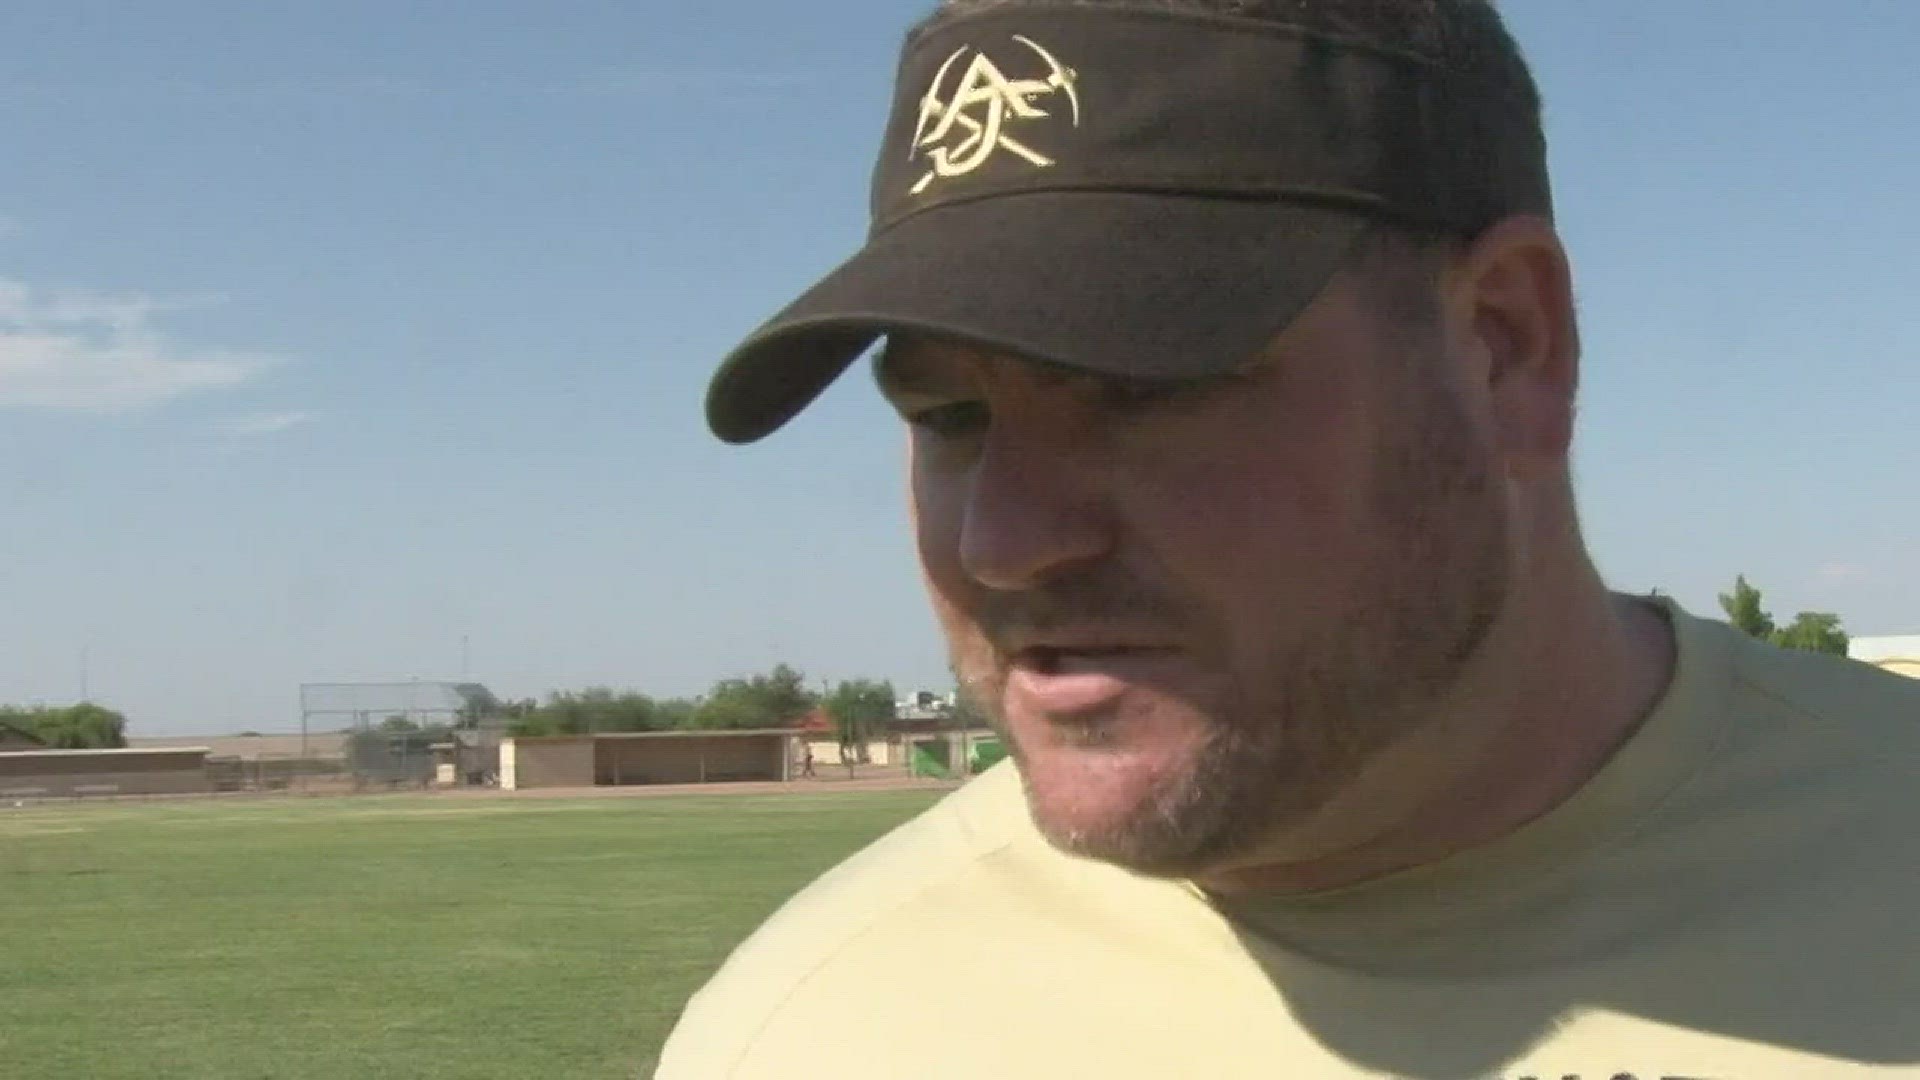 The Prospectors are ready to compete with a new quarterback and a crop of young talent.